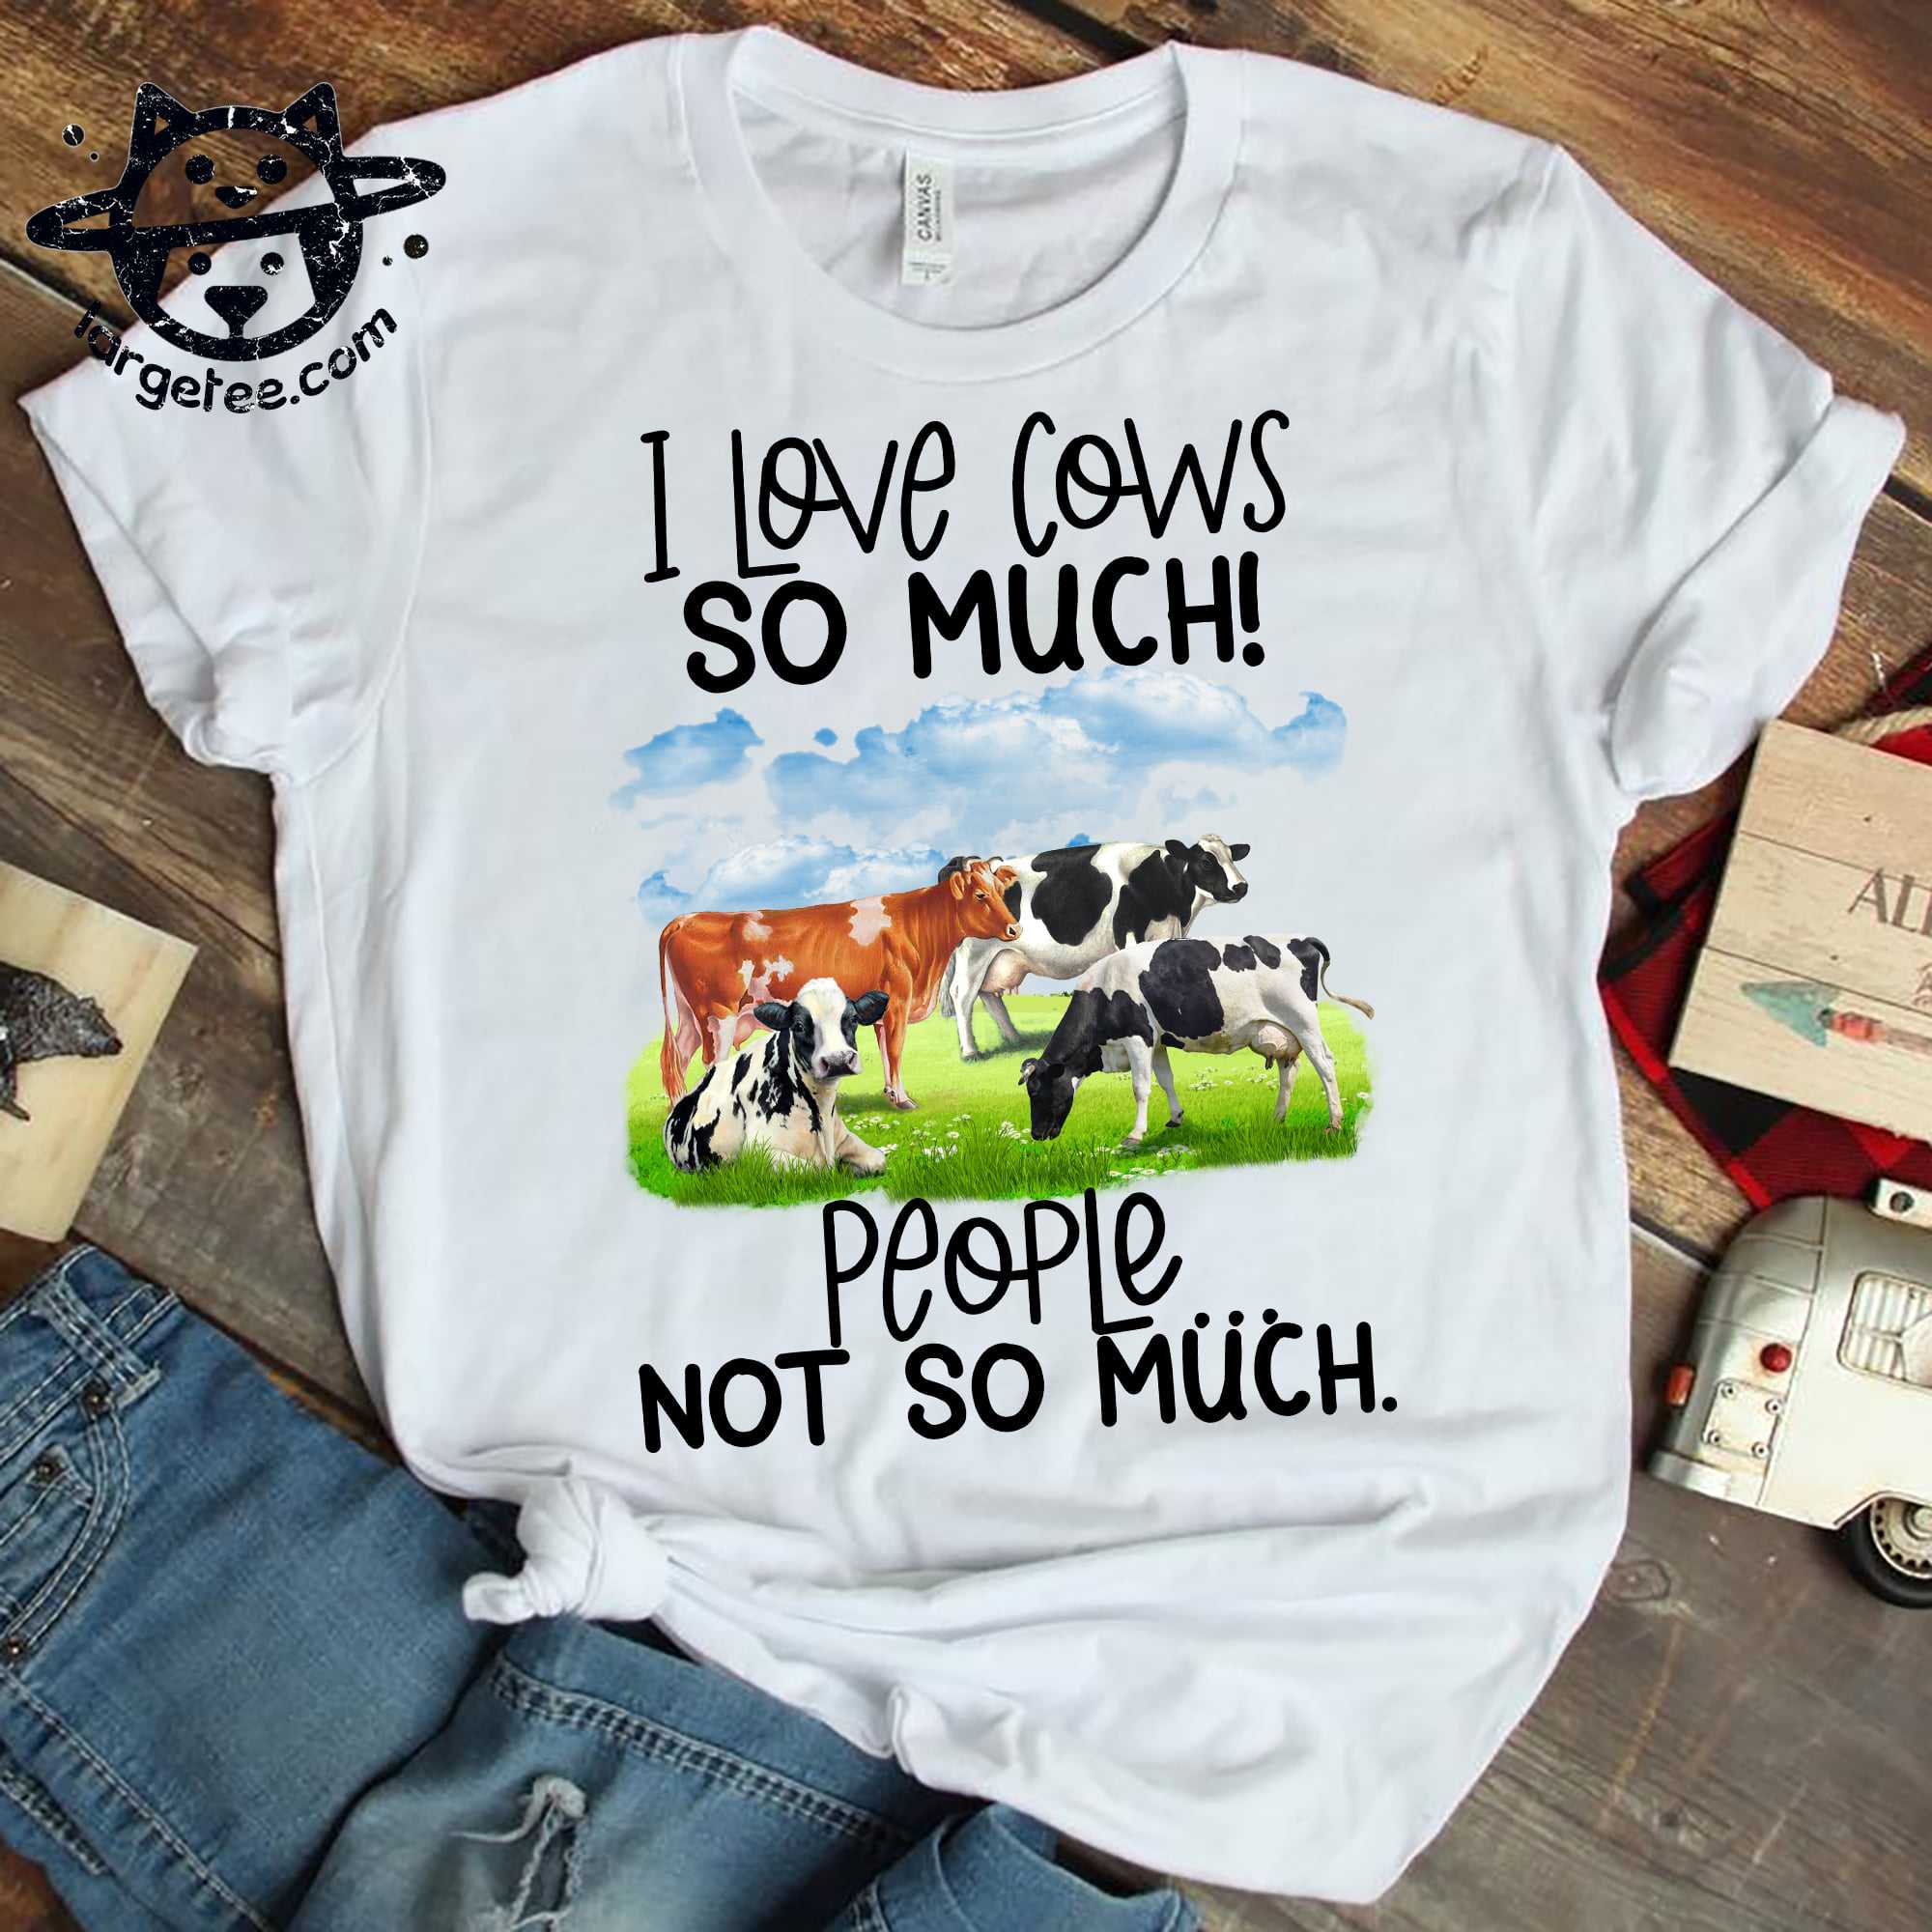 I love cows so much, people not so much - Cow the happiness